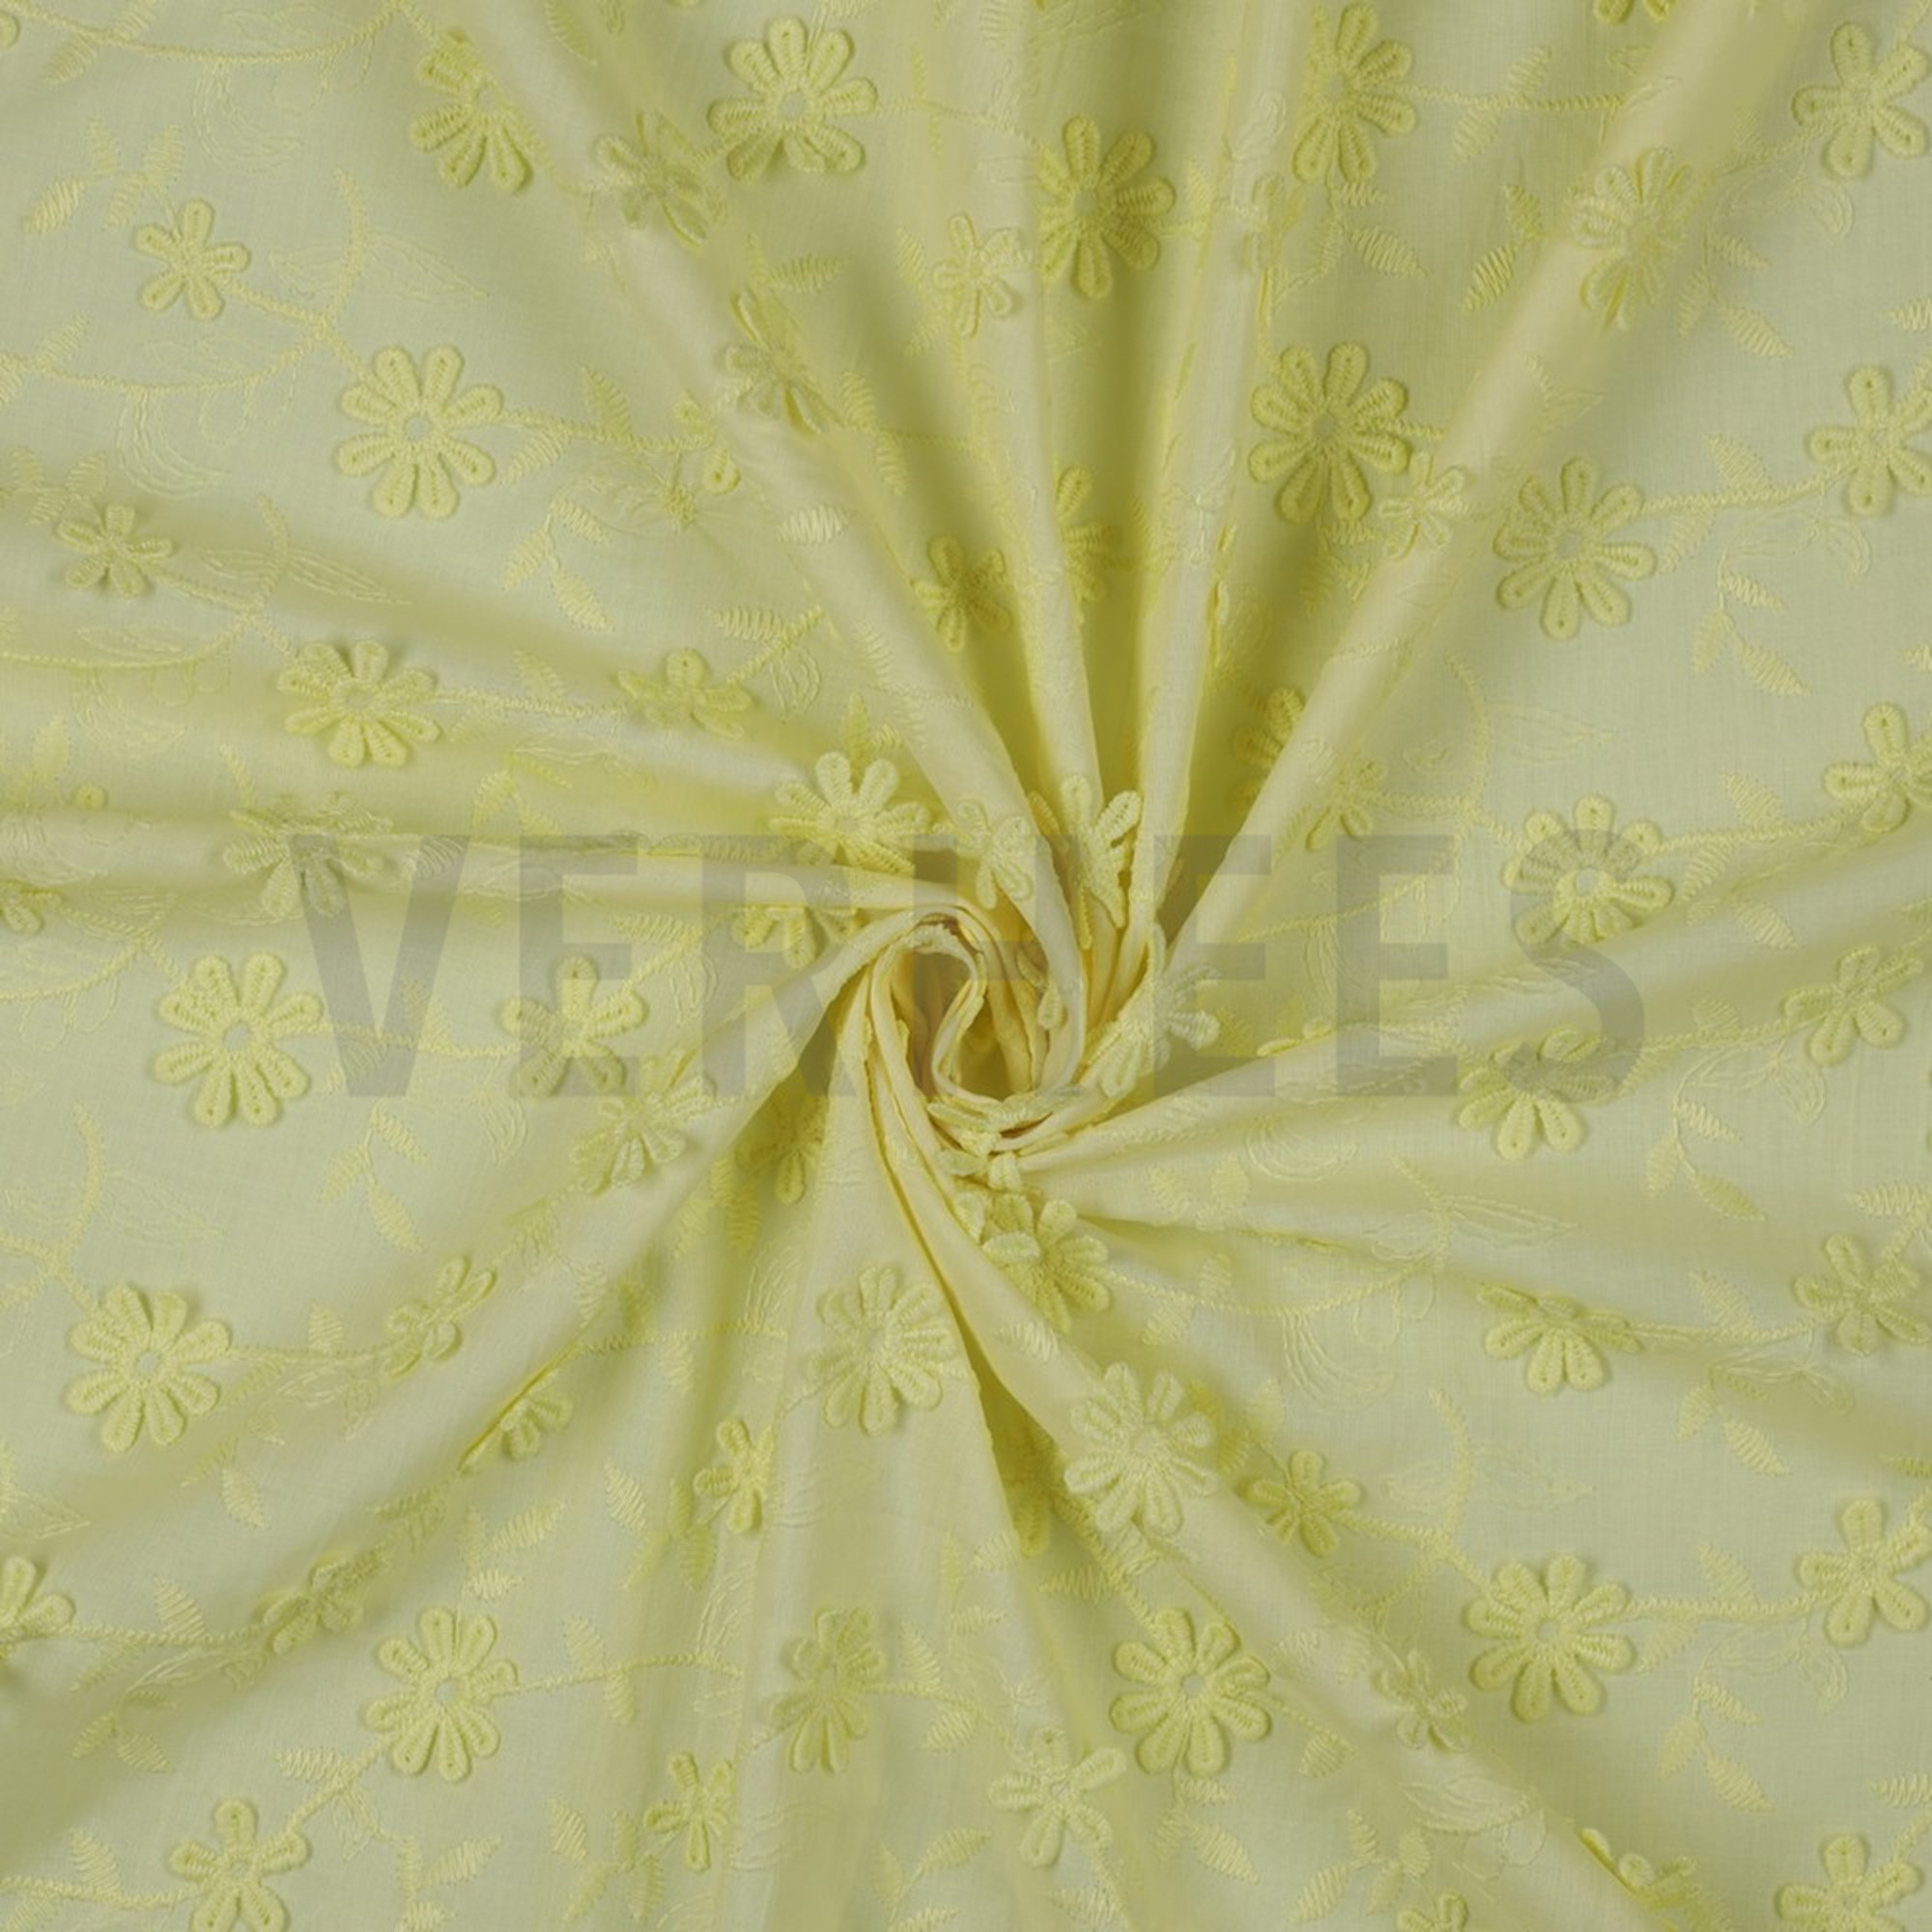 COTTON VOILE EMBROIDERY FLOWERS YELLOW (high resolution) #2